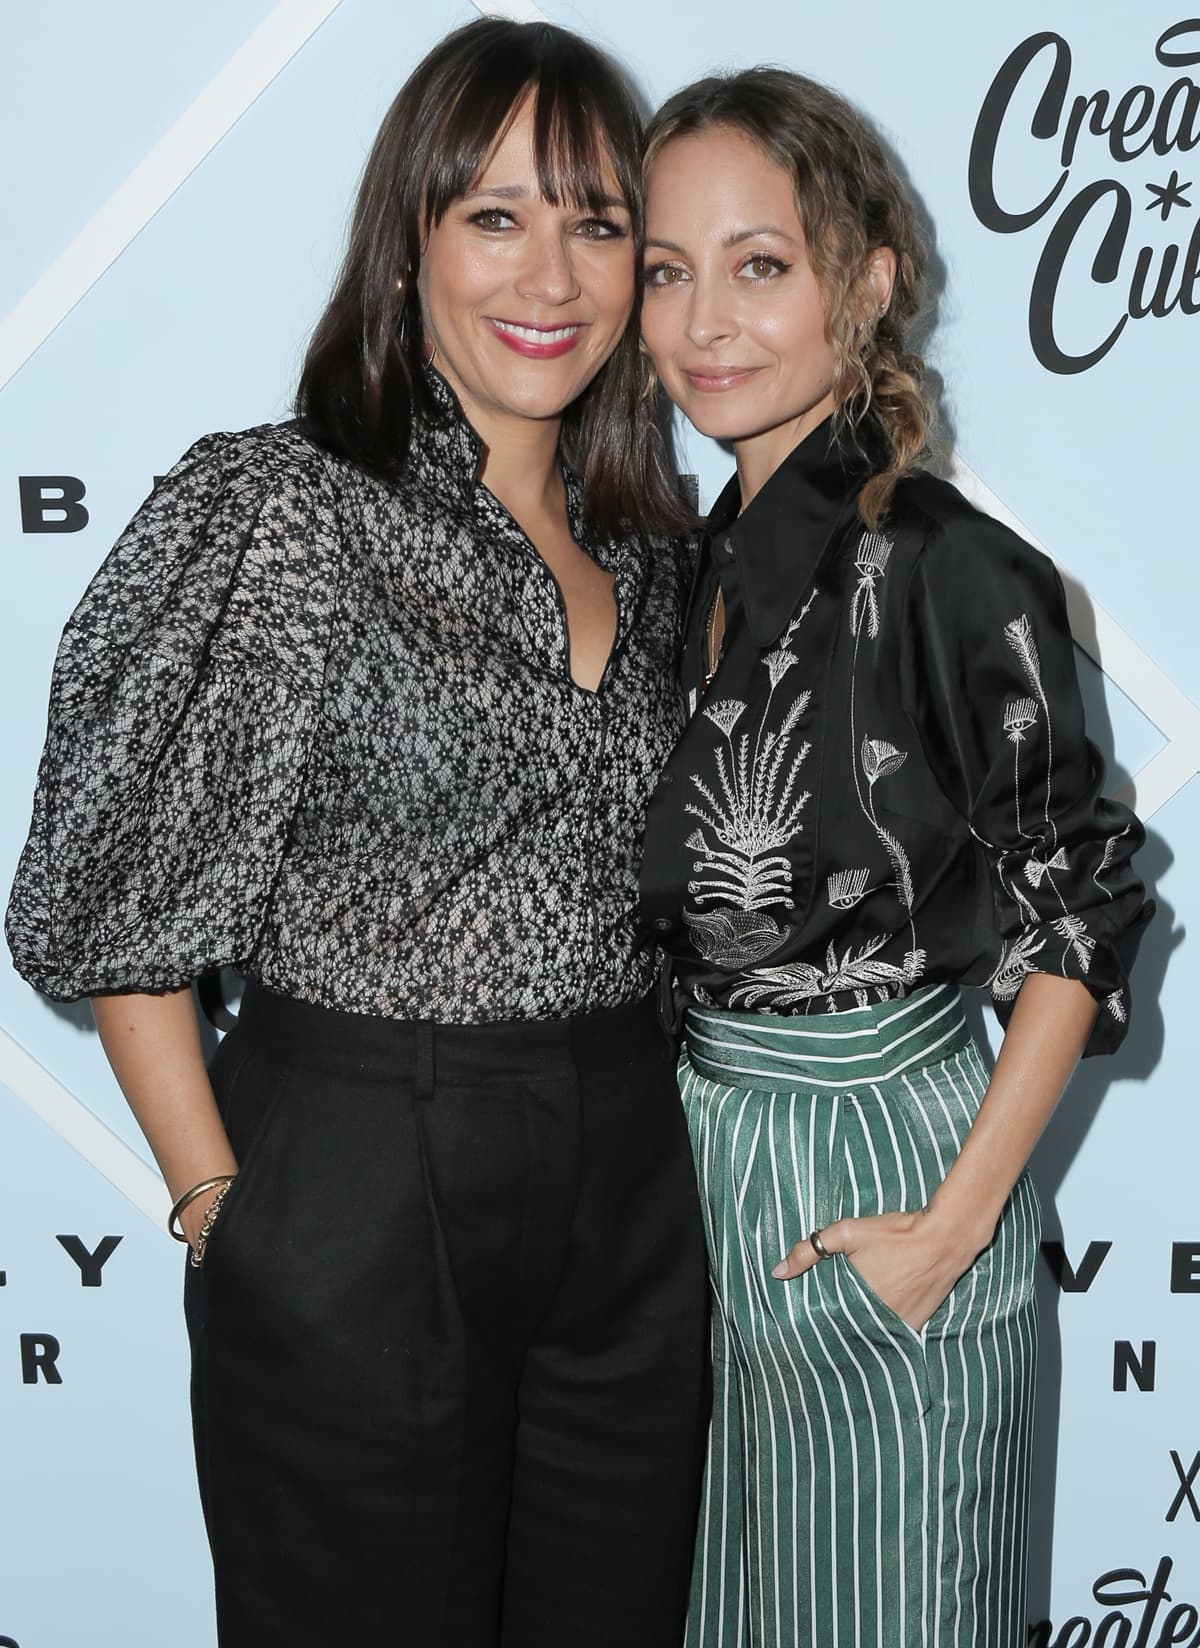 The height difference between Nicole Richie and Rashida Jones is relatively minimal, with Rashida Jones being slightly taller by approximately 1 ¼ inches (3.2 cm)